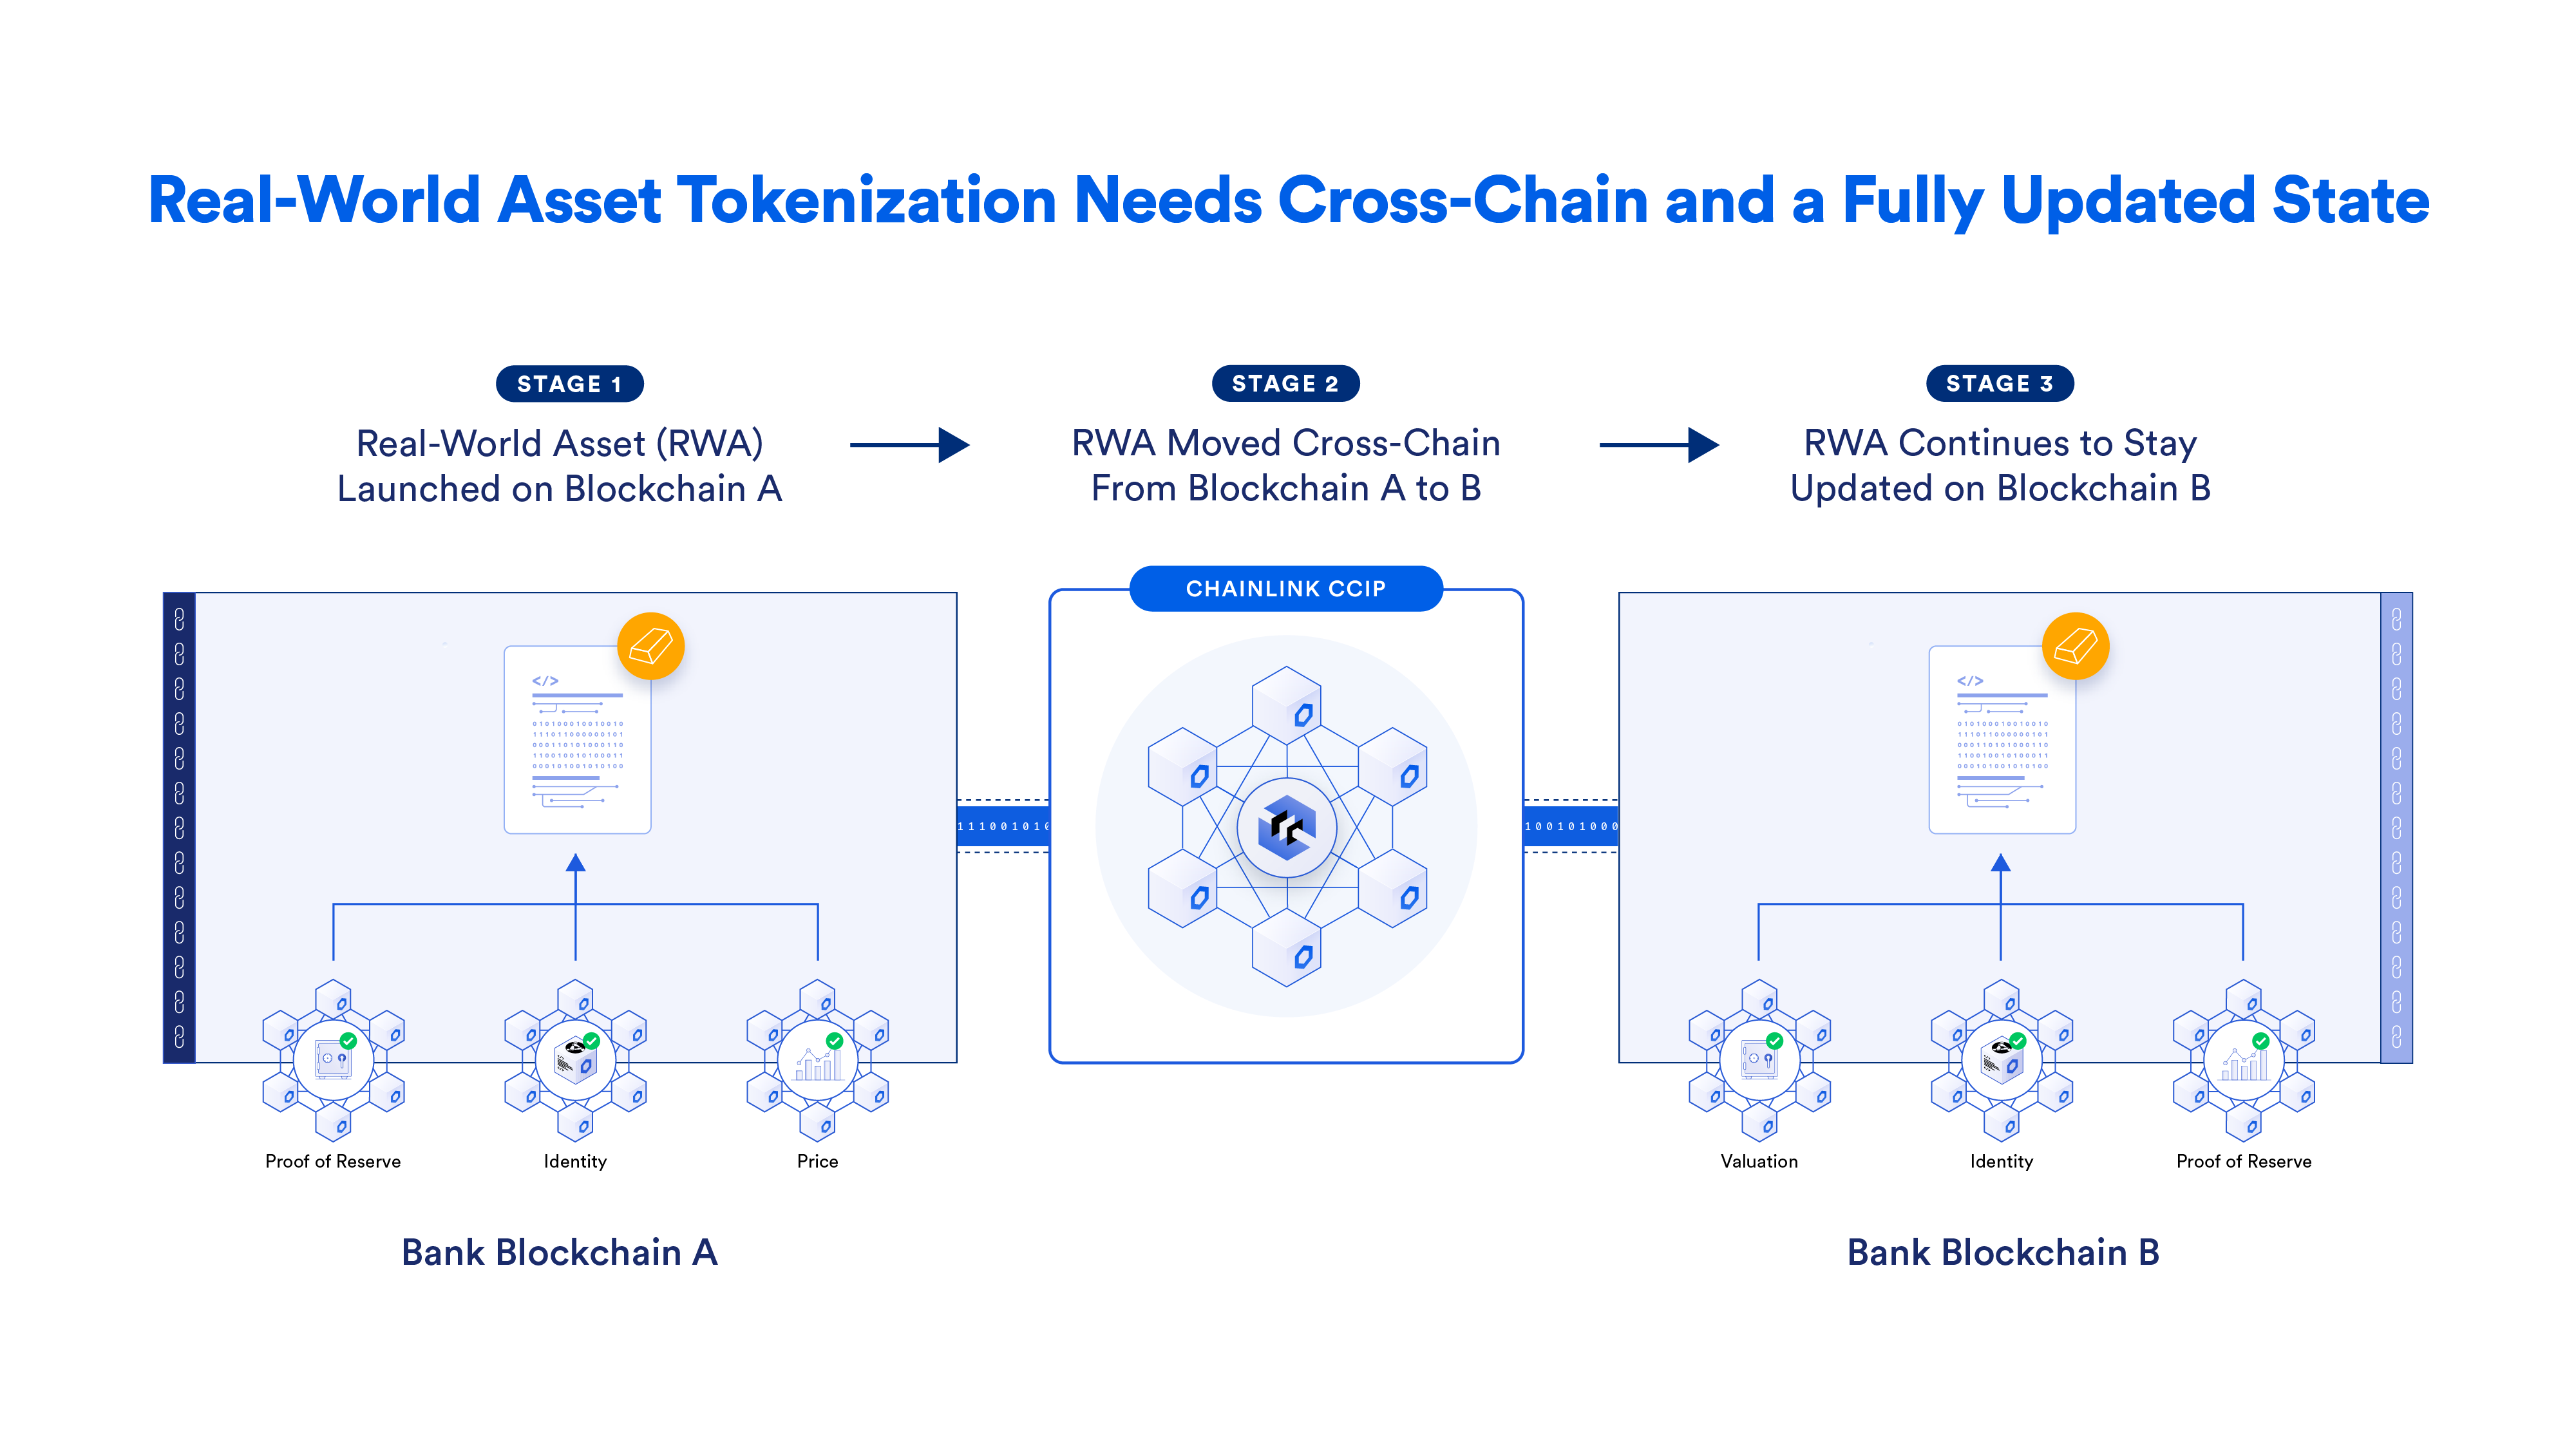 Chainlink CCIP provides tokenized assets with data and cross-chain interoperability.